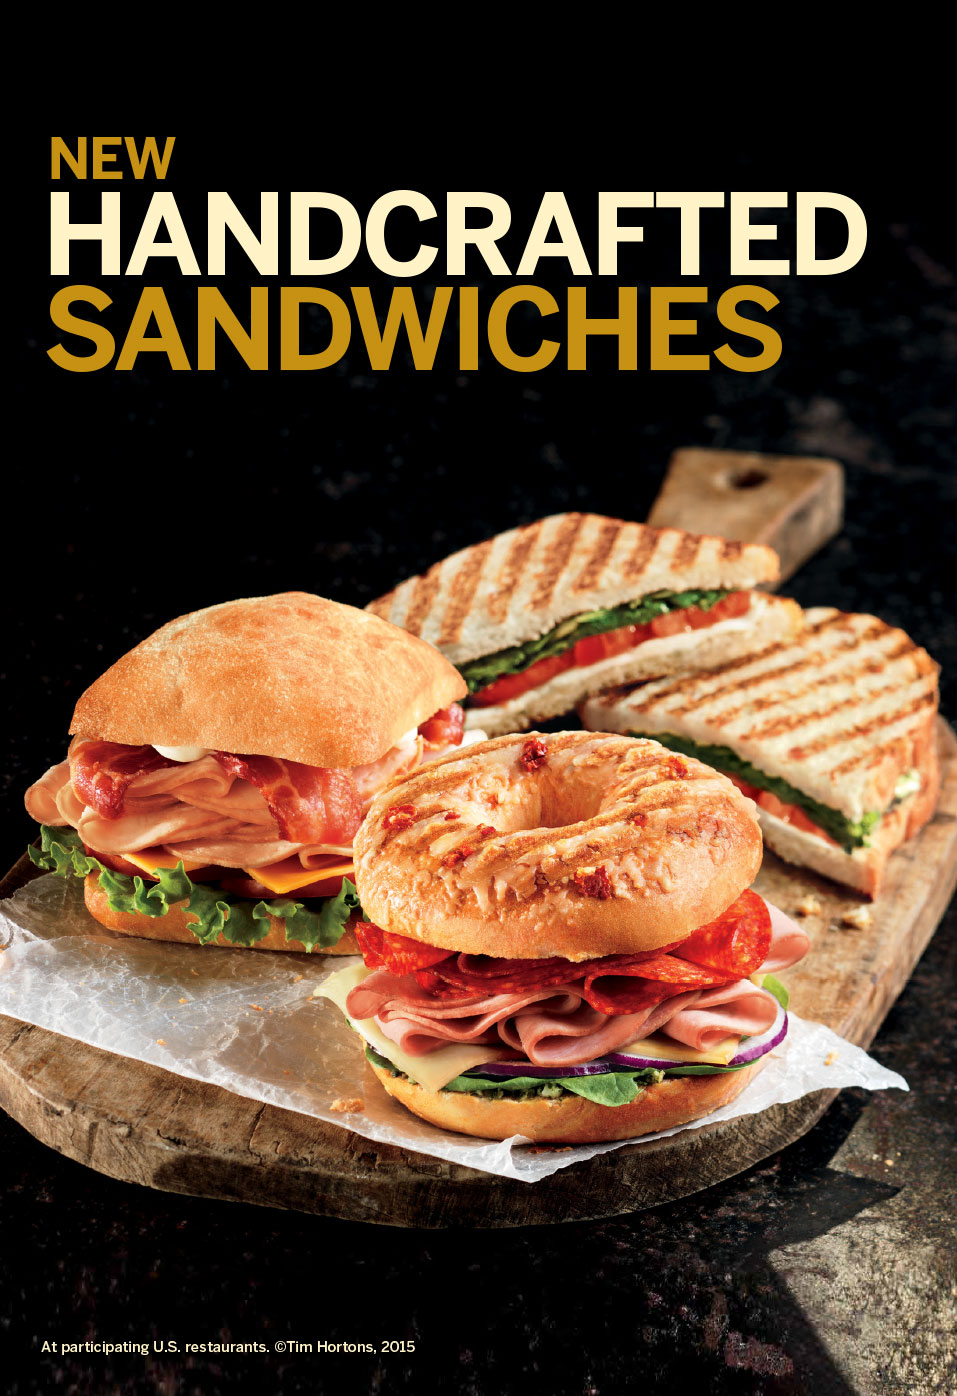 Ad for three Italian sandwiches, with the sandwiches sitting on a cutting board against a dark background